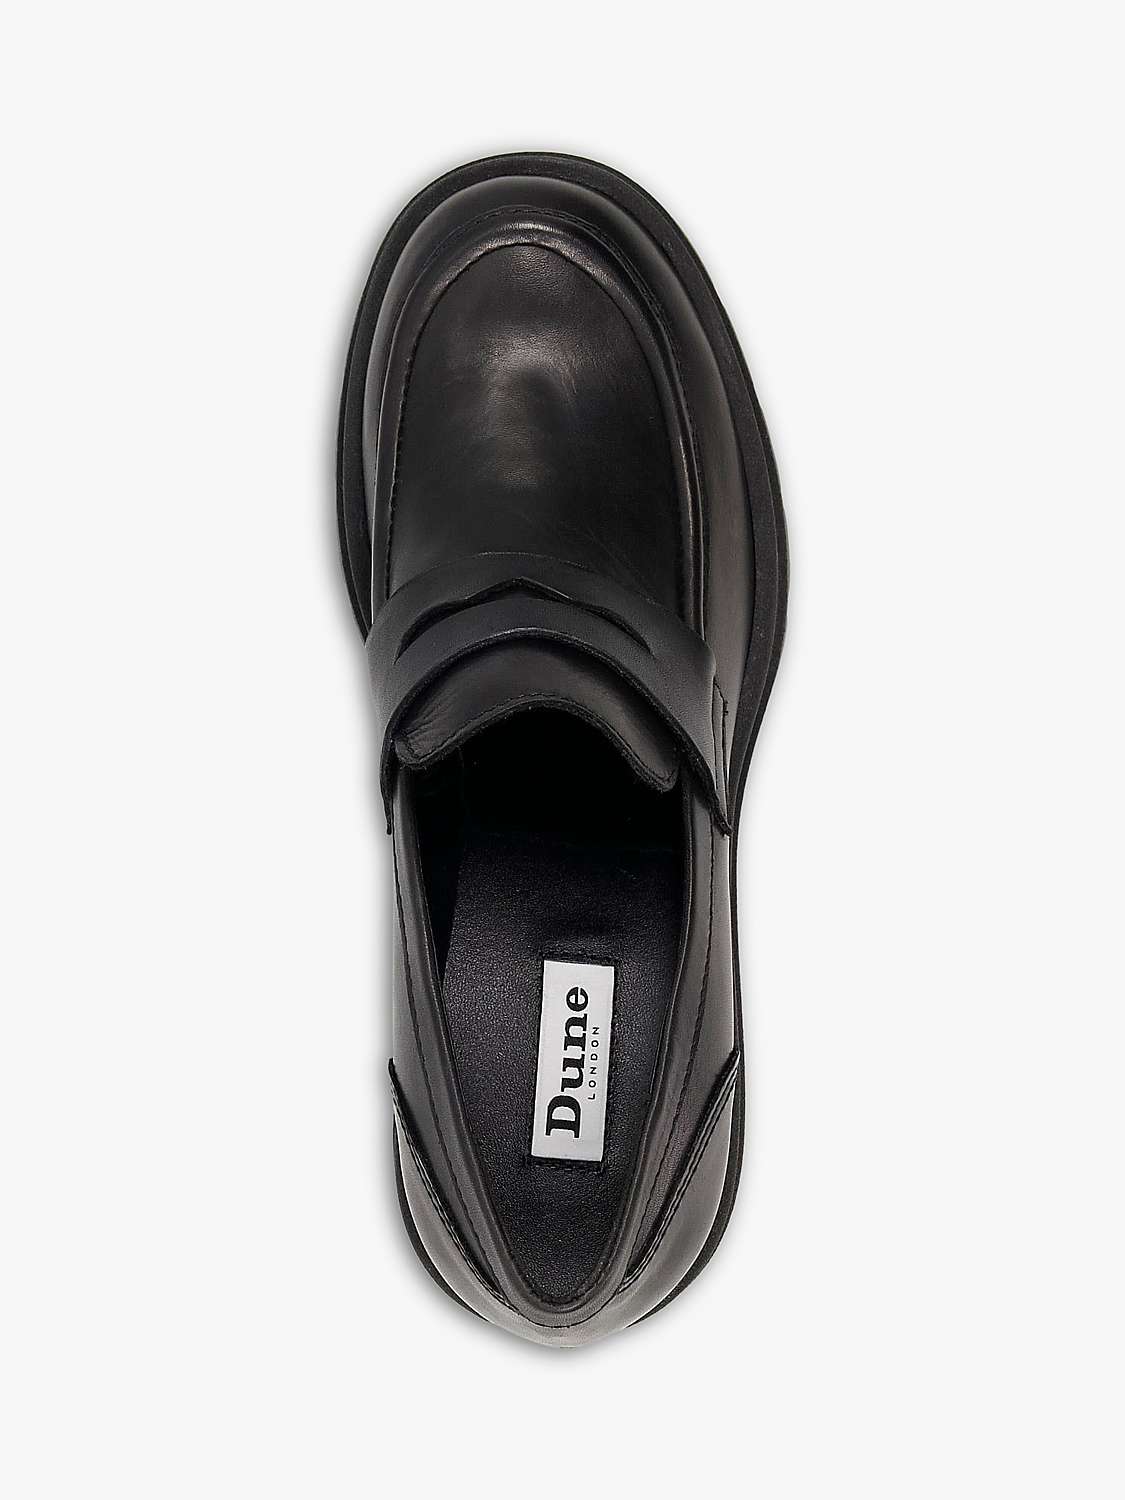 Dune Ground Leather Heeled Loafers, Black at John Lewis & Partners